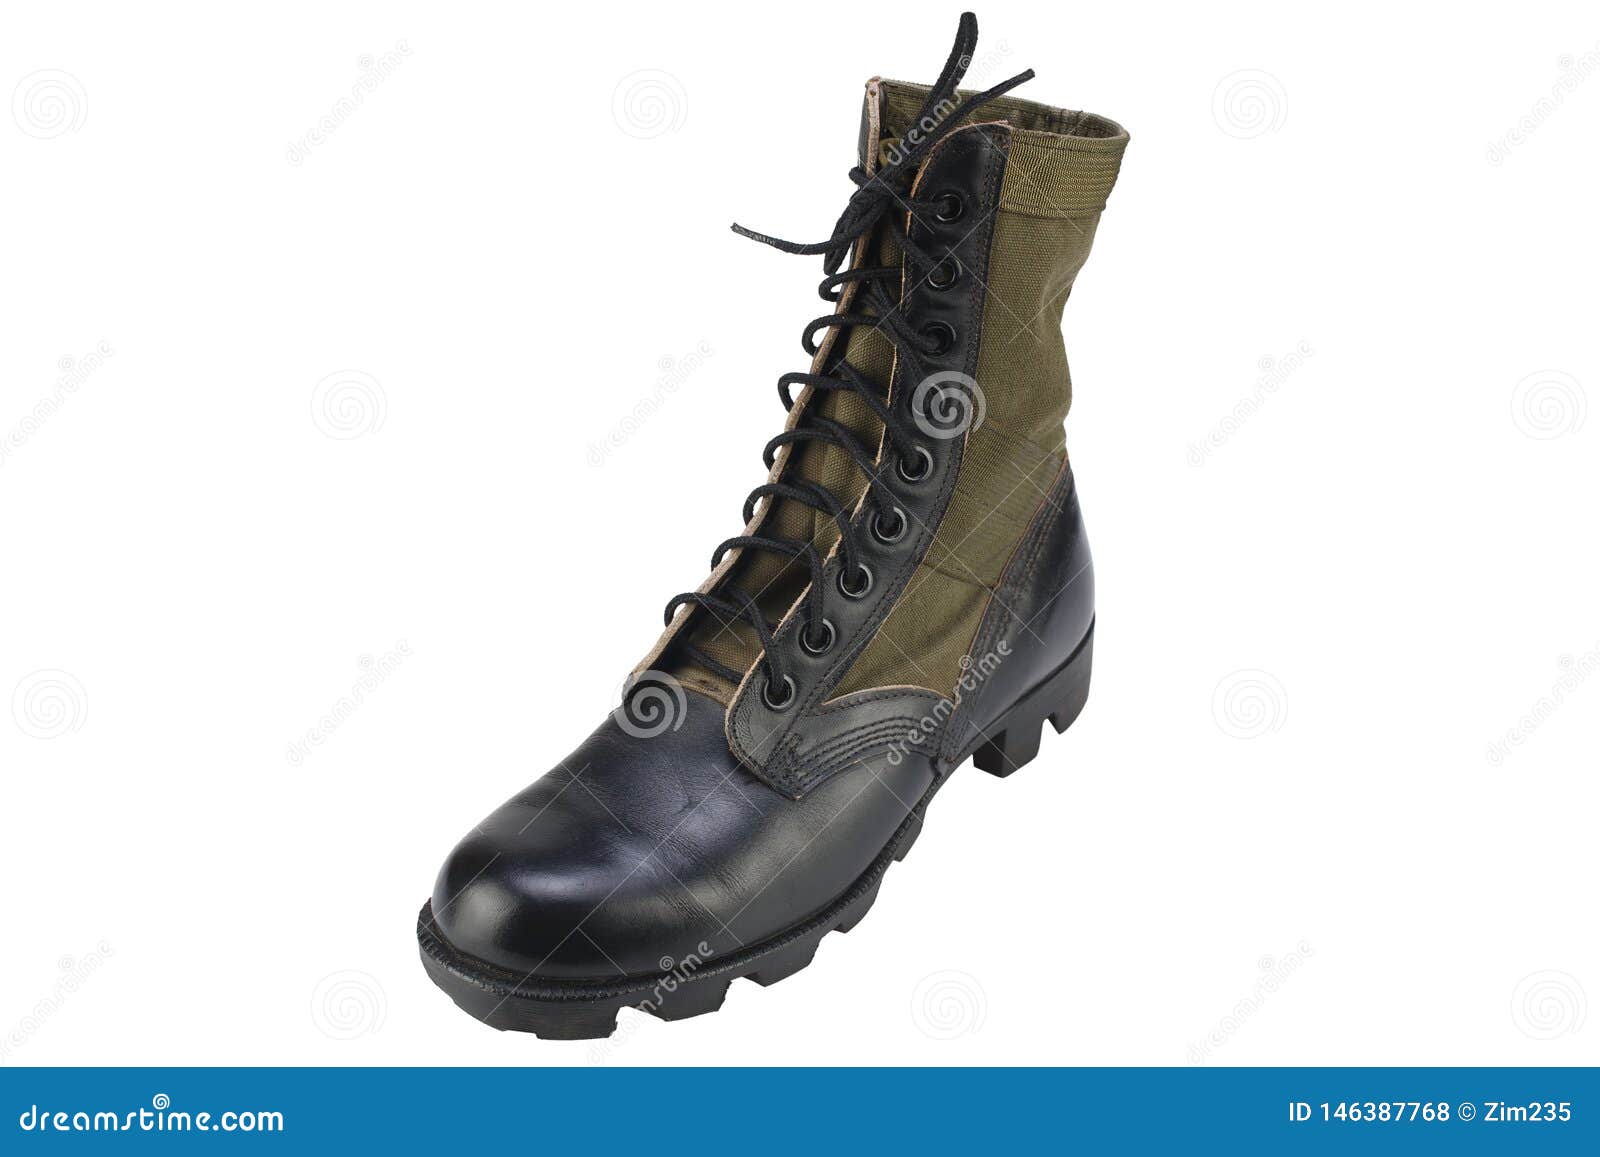 New Brand US Army Pattern Jungle Boots Isolated Stock Photo - Image of ...